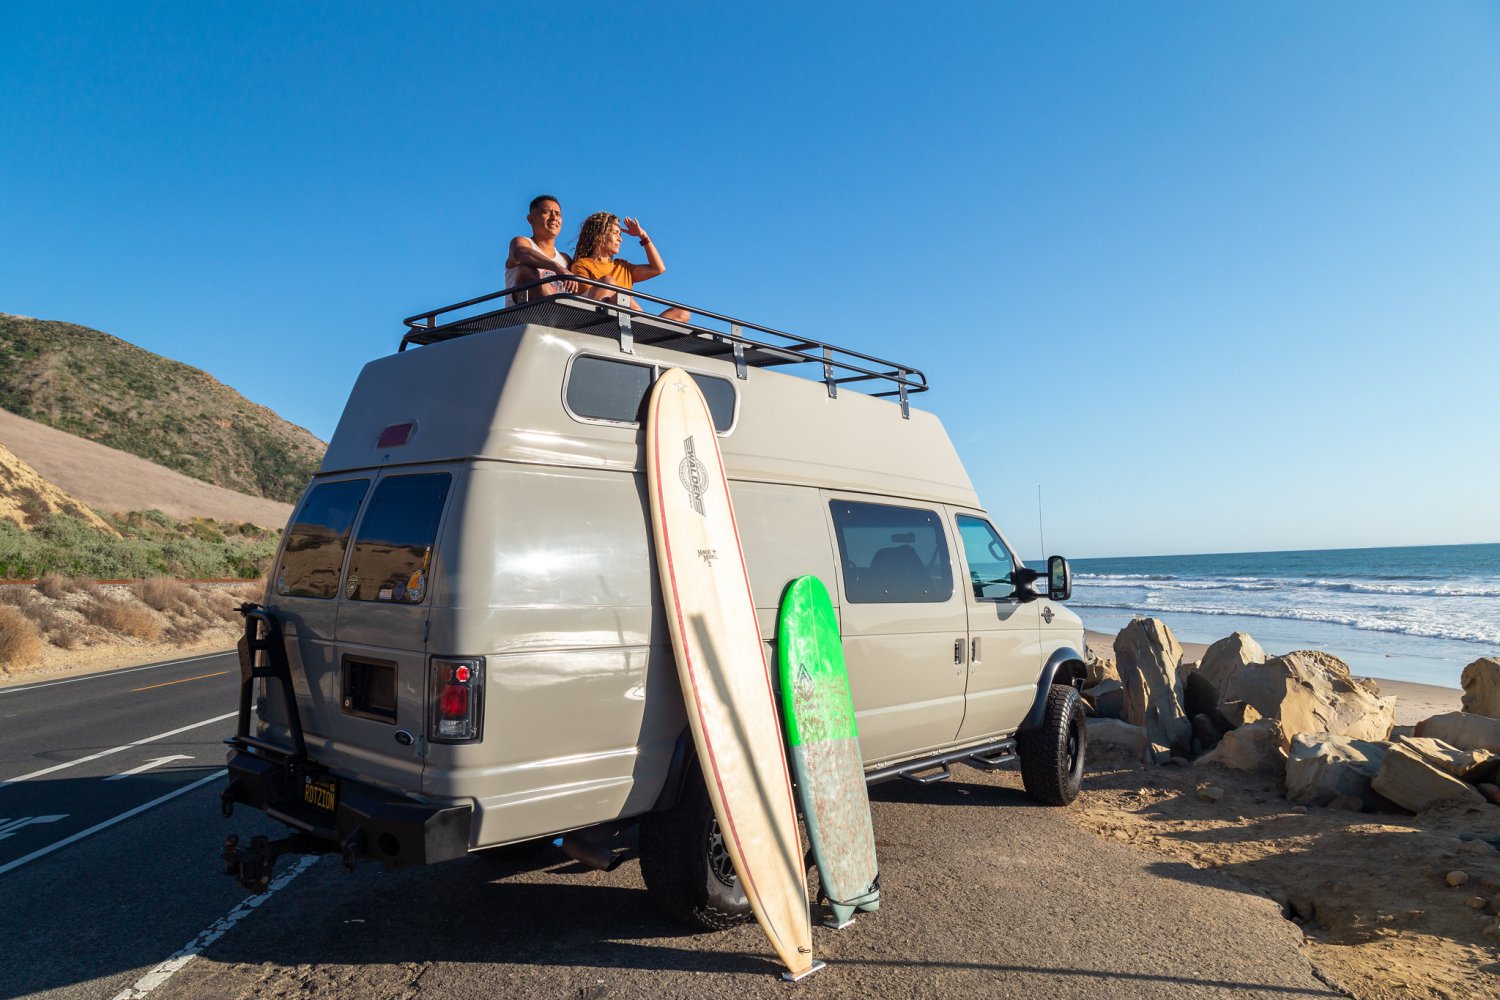 14 Reasons Why Ventura is Your Affordable Beach Destination